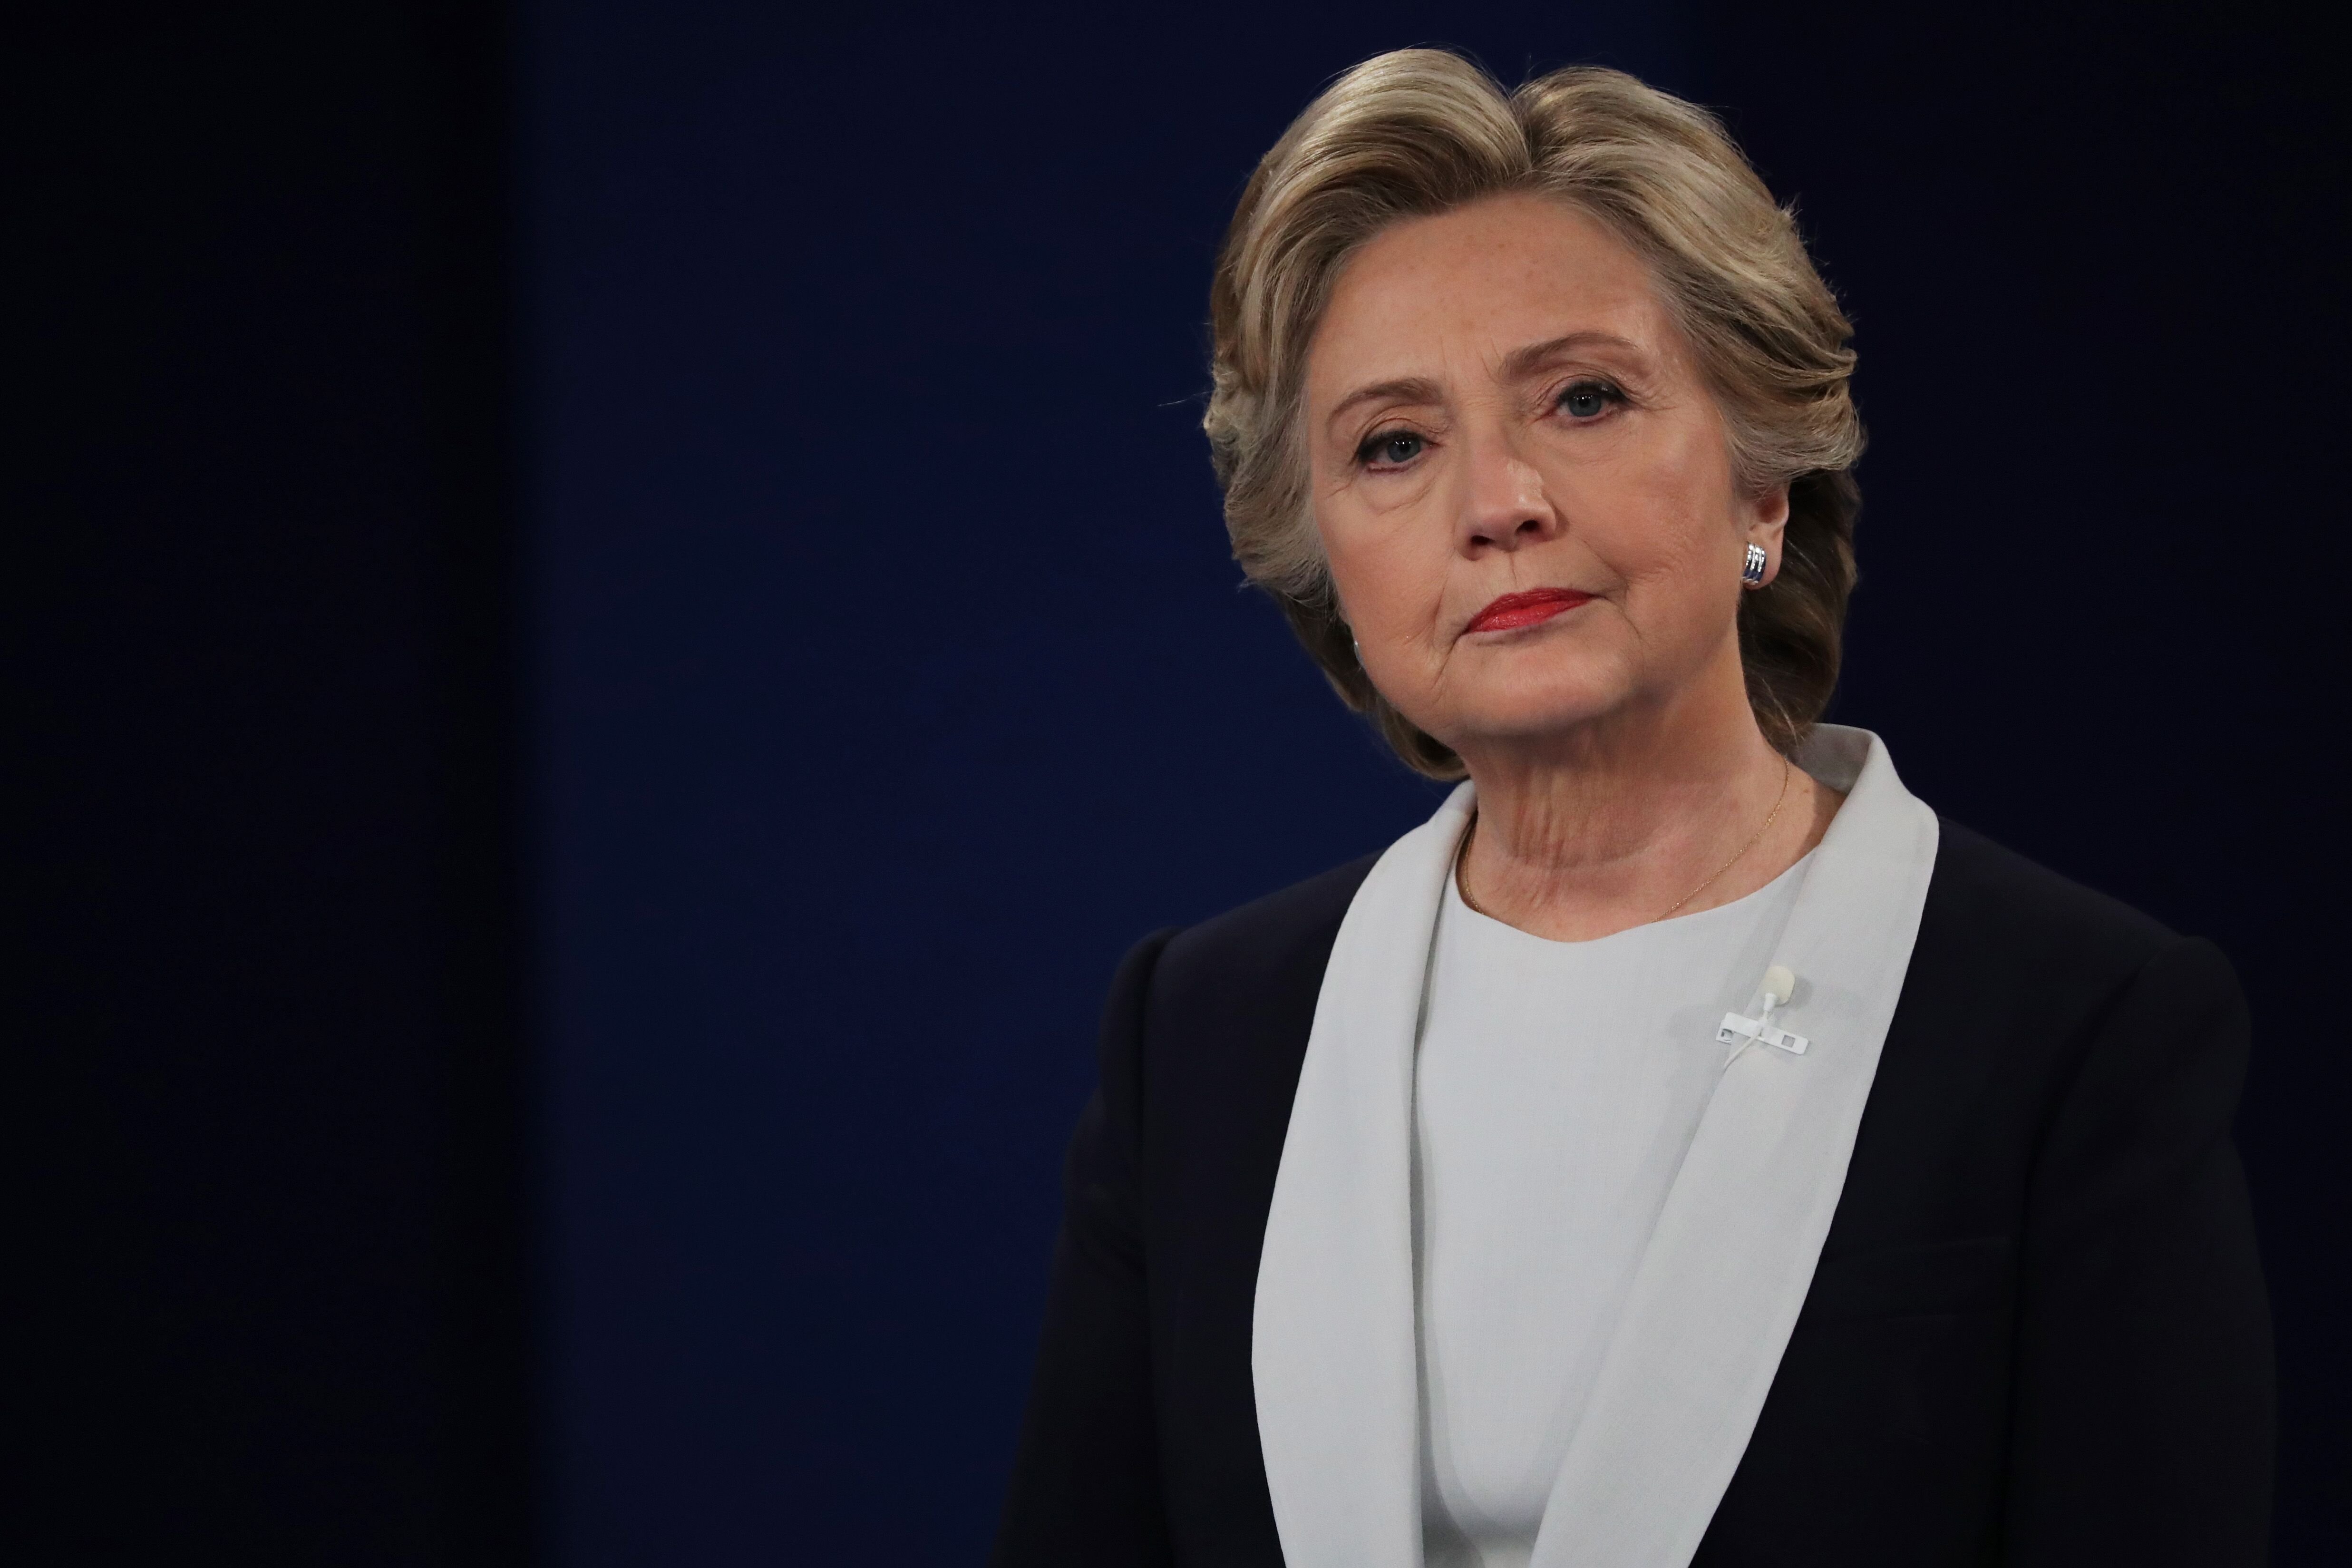 Hillary Clinton listens to a question during the town hall debate at Washington University in St Louis, Missouri | Photo: Getty Images